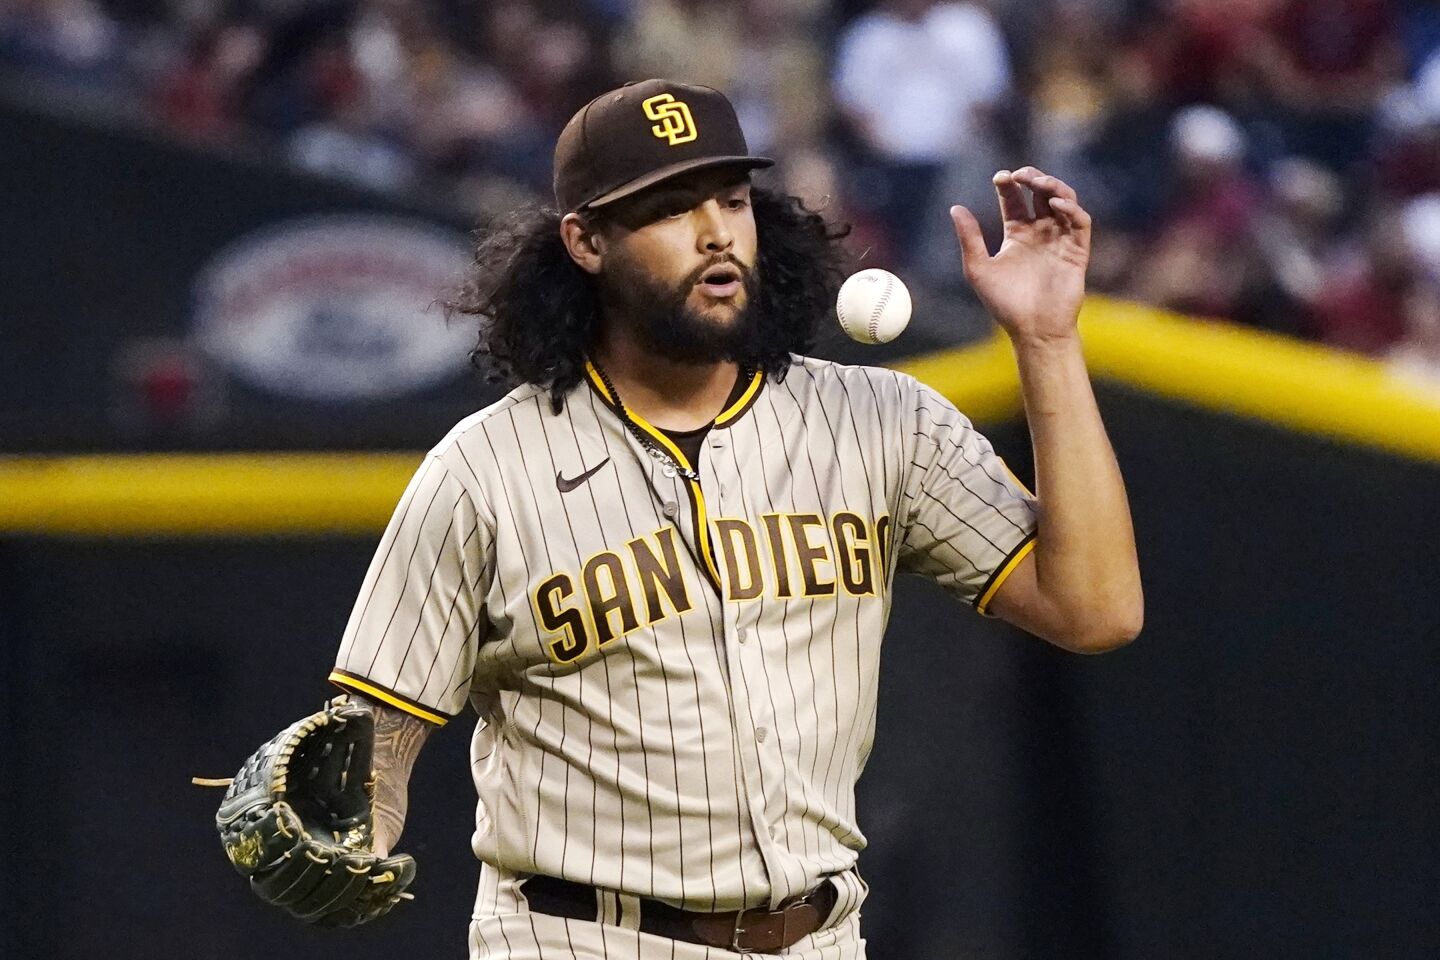 Game 3: Padres LHP Sean Manaea (1-0, 0.00 ERA)Acquired from the A’s earlier this month, Manaea was 2-2 with a 2.68 ERA, 26 strikeouts and a 1.19 WHIP in seven career starts (37 IP) in the Bay Bridge Series against the Giants. Manaea earned the win in his Padres debut with seven strikeouts over seven no-hit innings in Arizona.